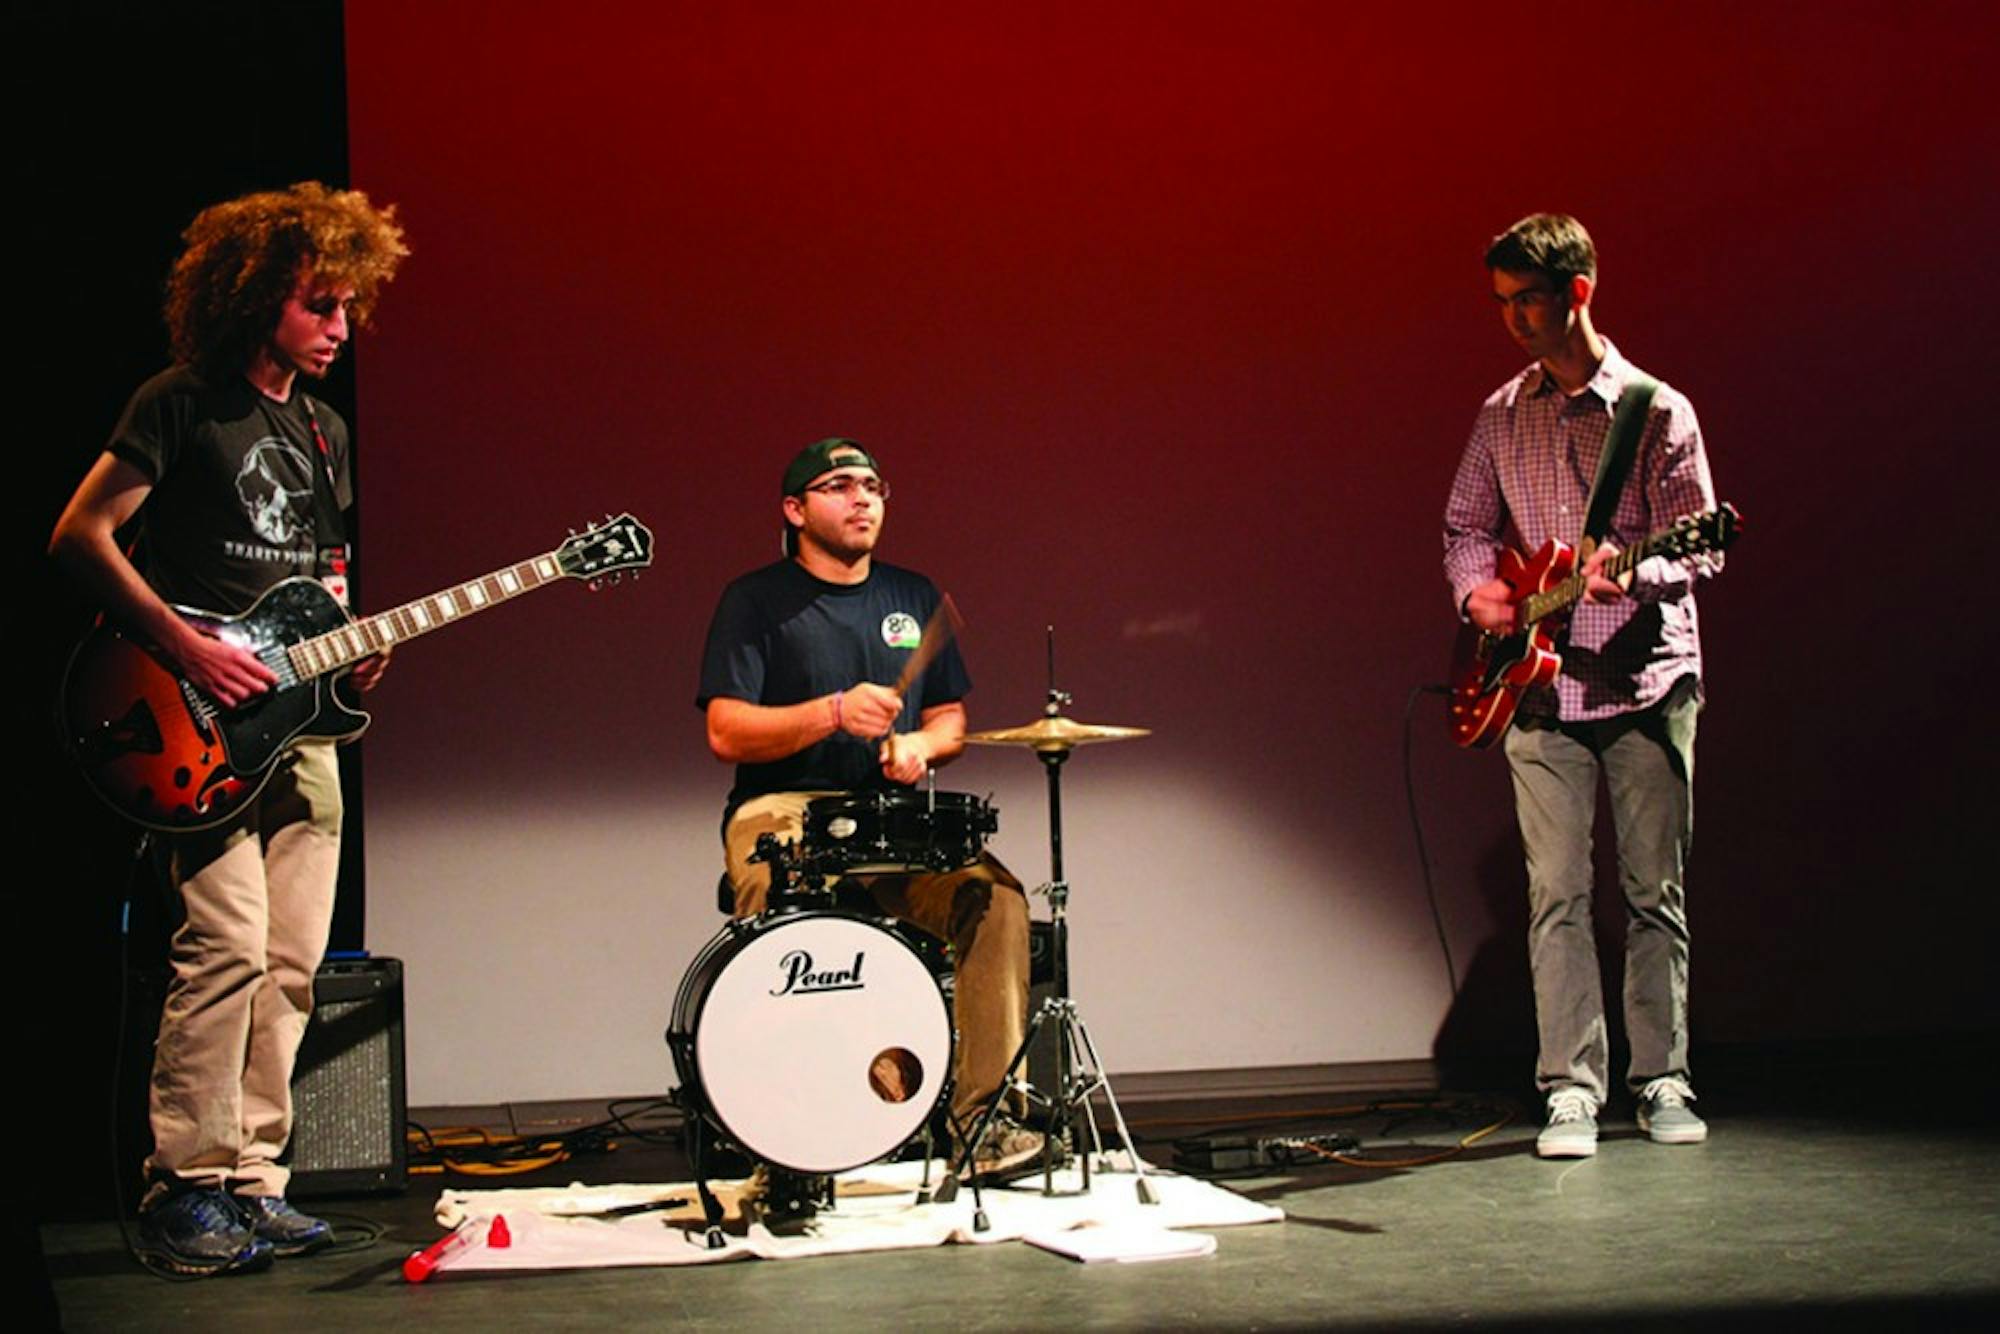 Members of Half the City opened for Casual Thursday in the fall term.